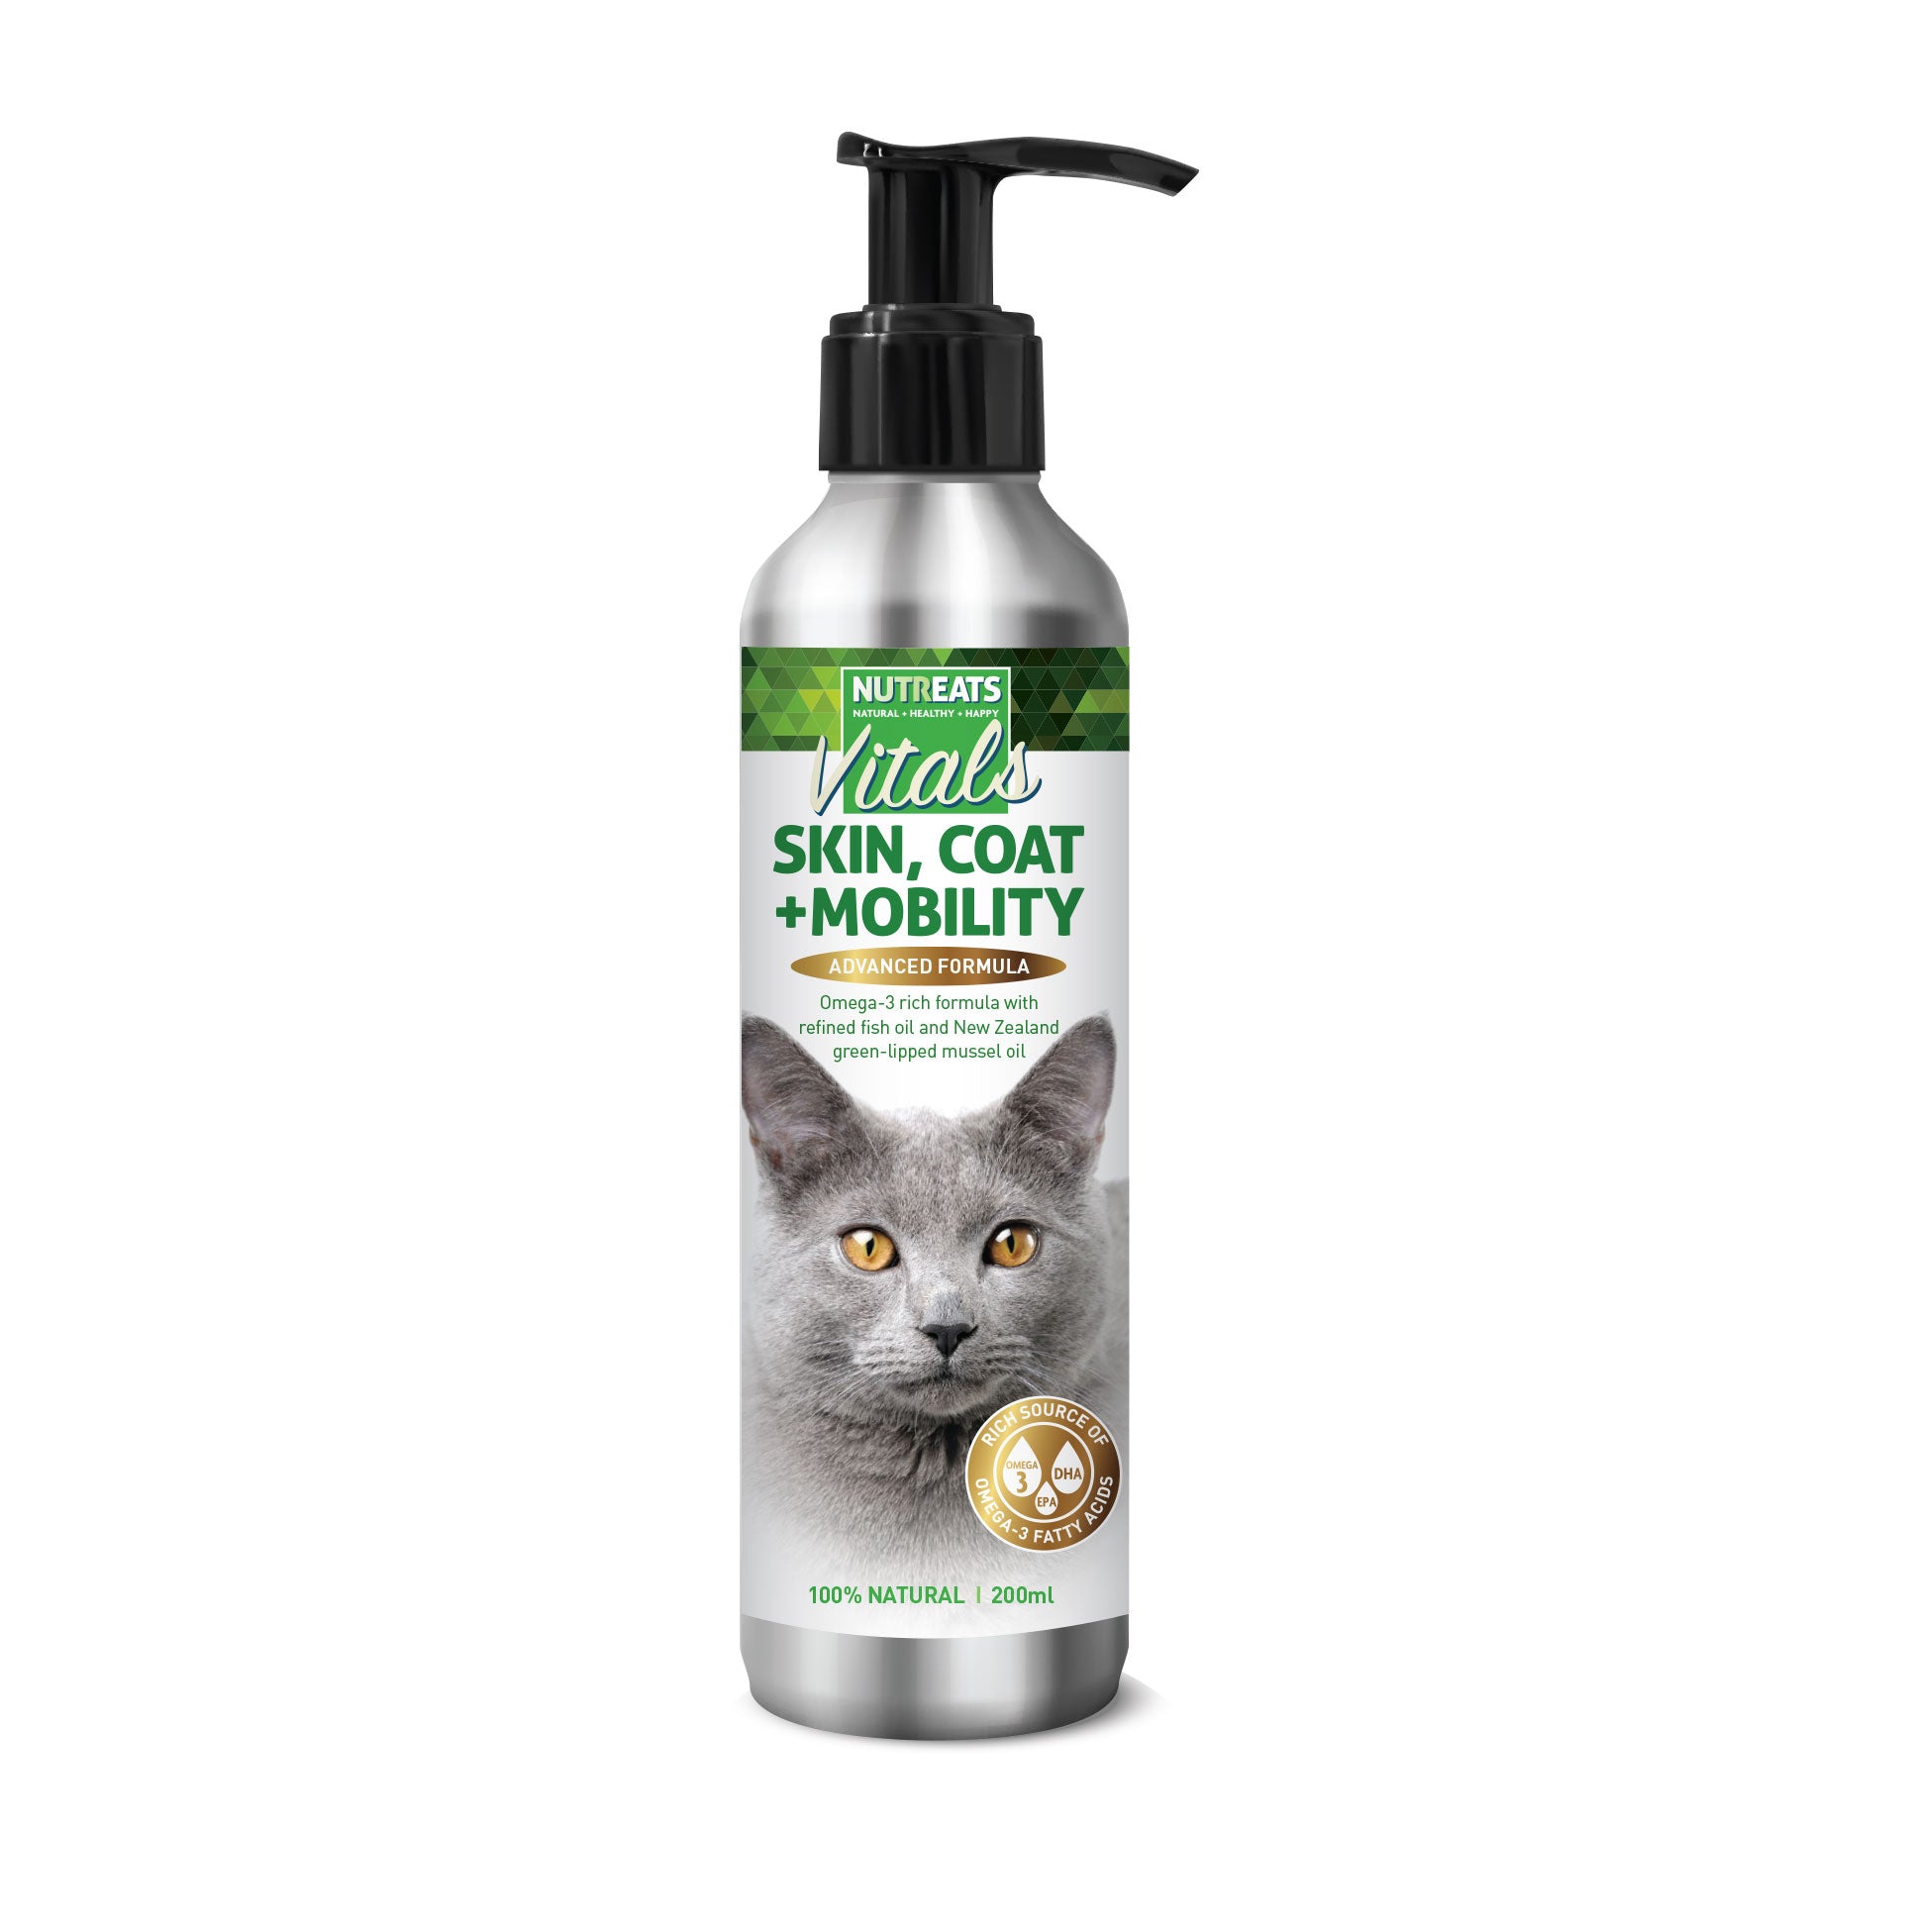 Nutreats Vitals, Skin, Coat and Mobility - advanced formula. Omega-3 rich supporting your cat's health this daily supplement with green-lipped mussel oil.